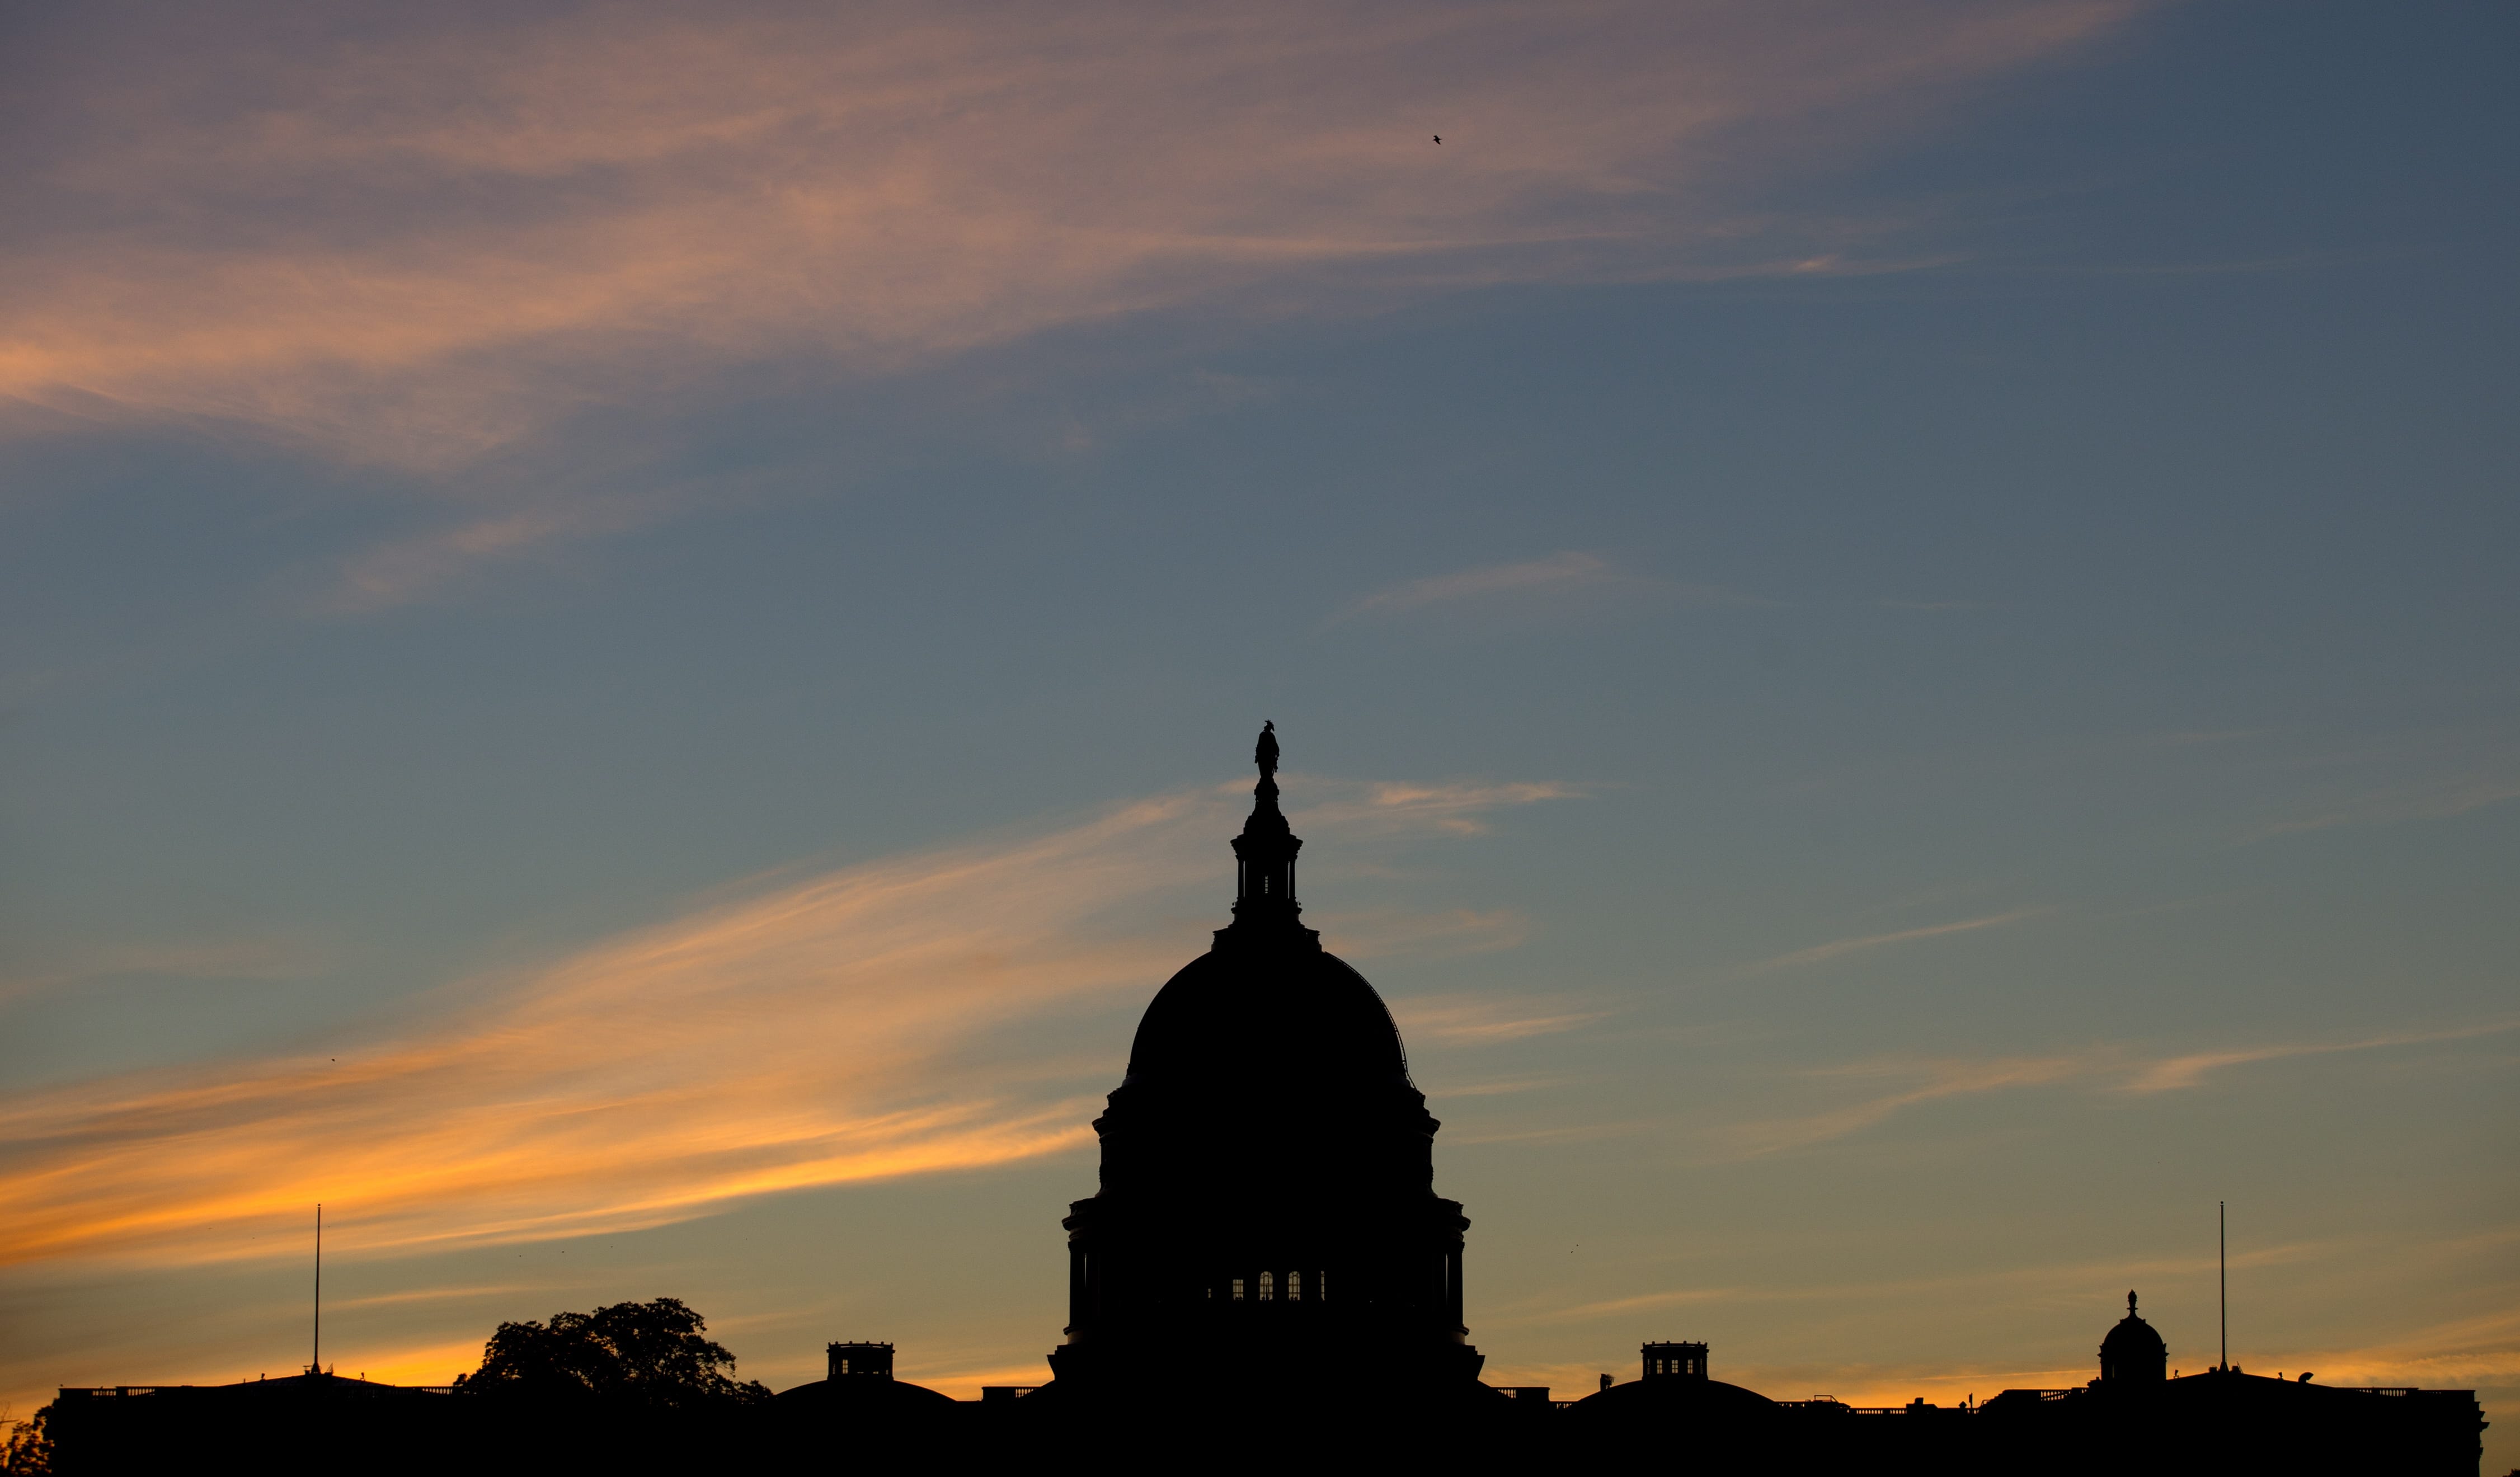 The U.S. Capitol dome is silhouetted by the sunrise.